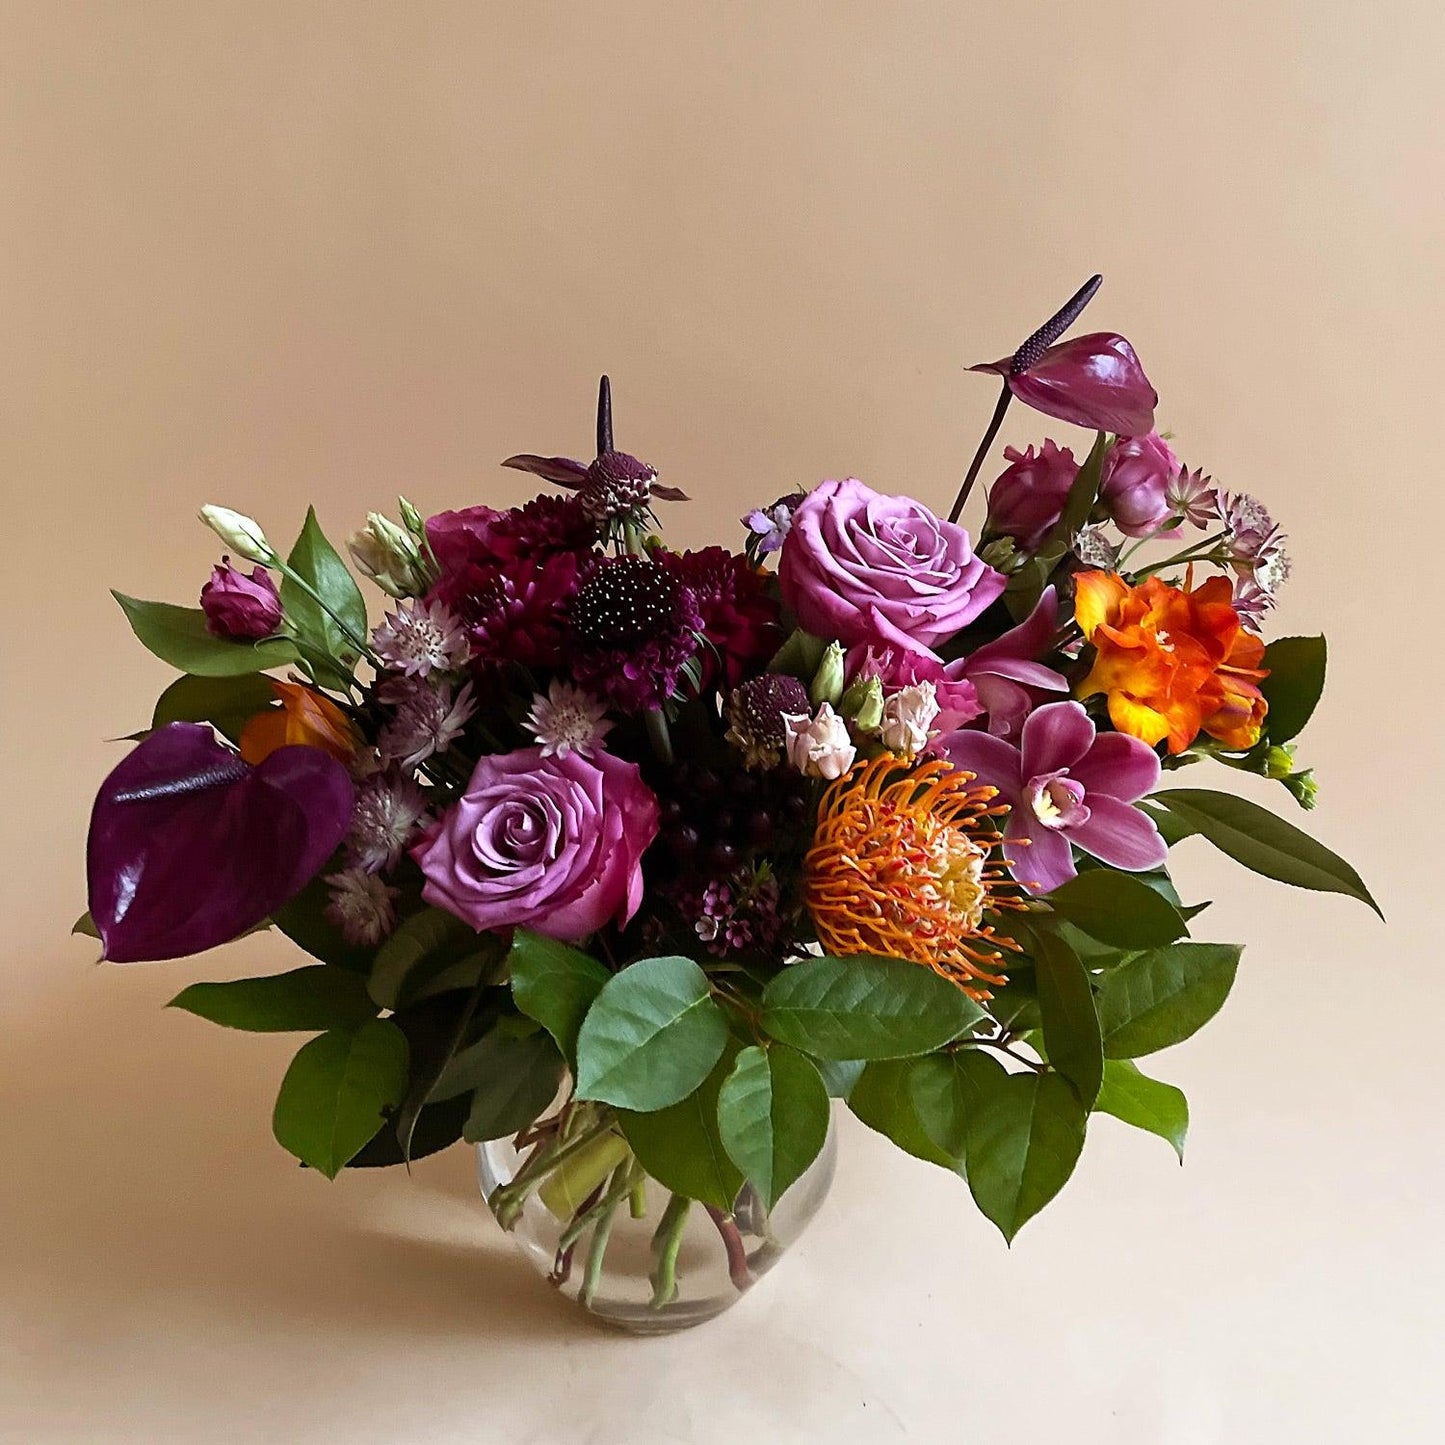 Image of a dynamic bouquet starting with yellows, deepening to lavender and purple, with a touch of acid green for energy. Order online for same-day flower delivery from Toronto's best florist, available near you.